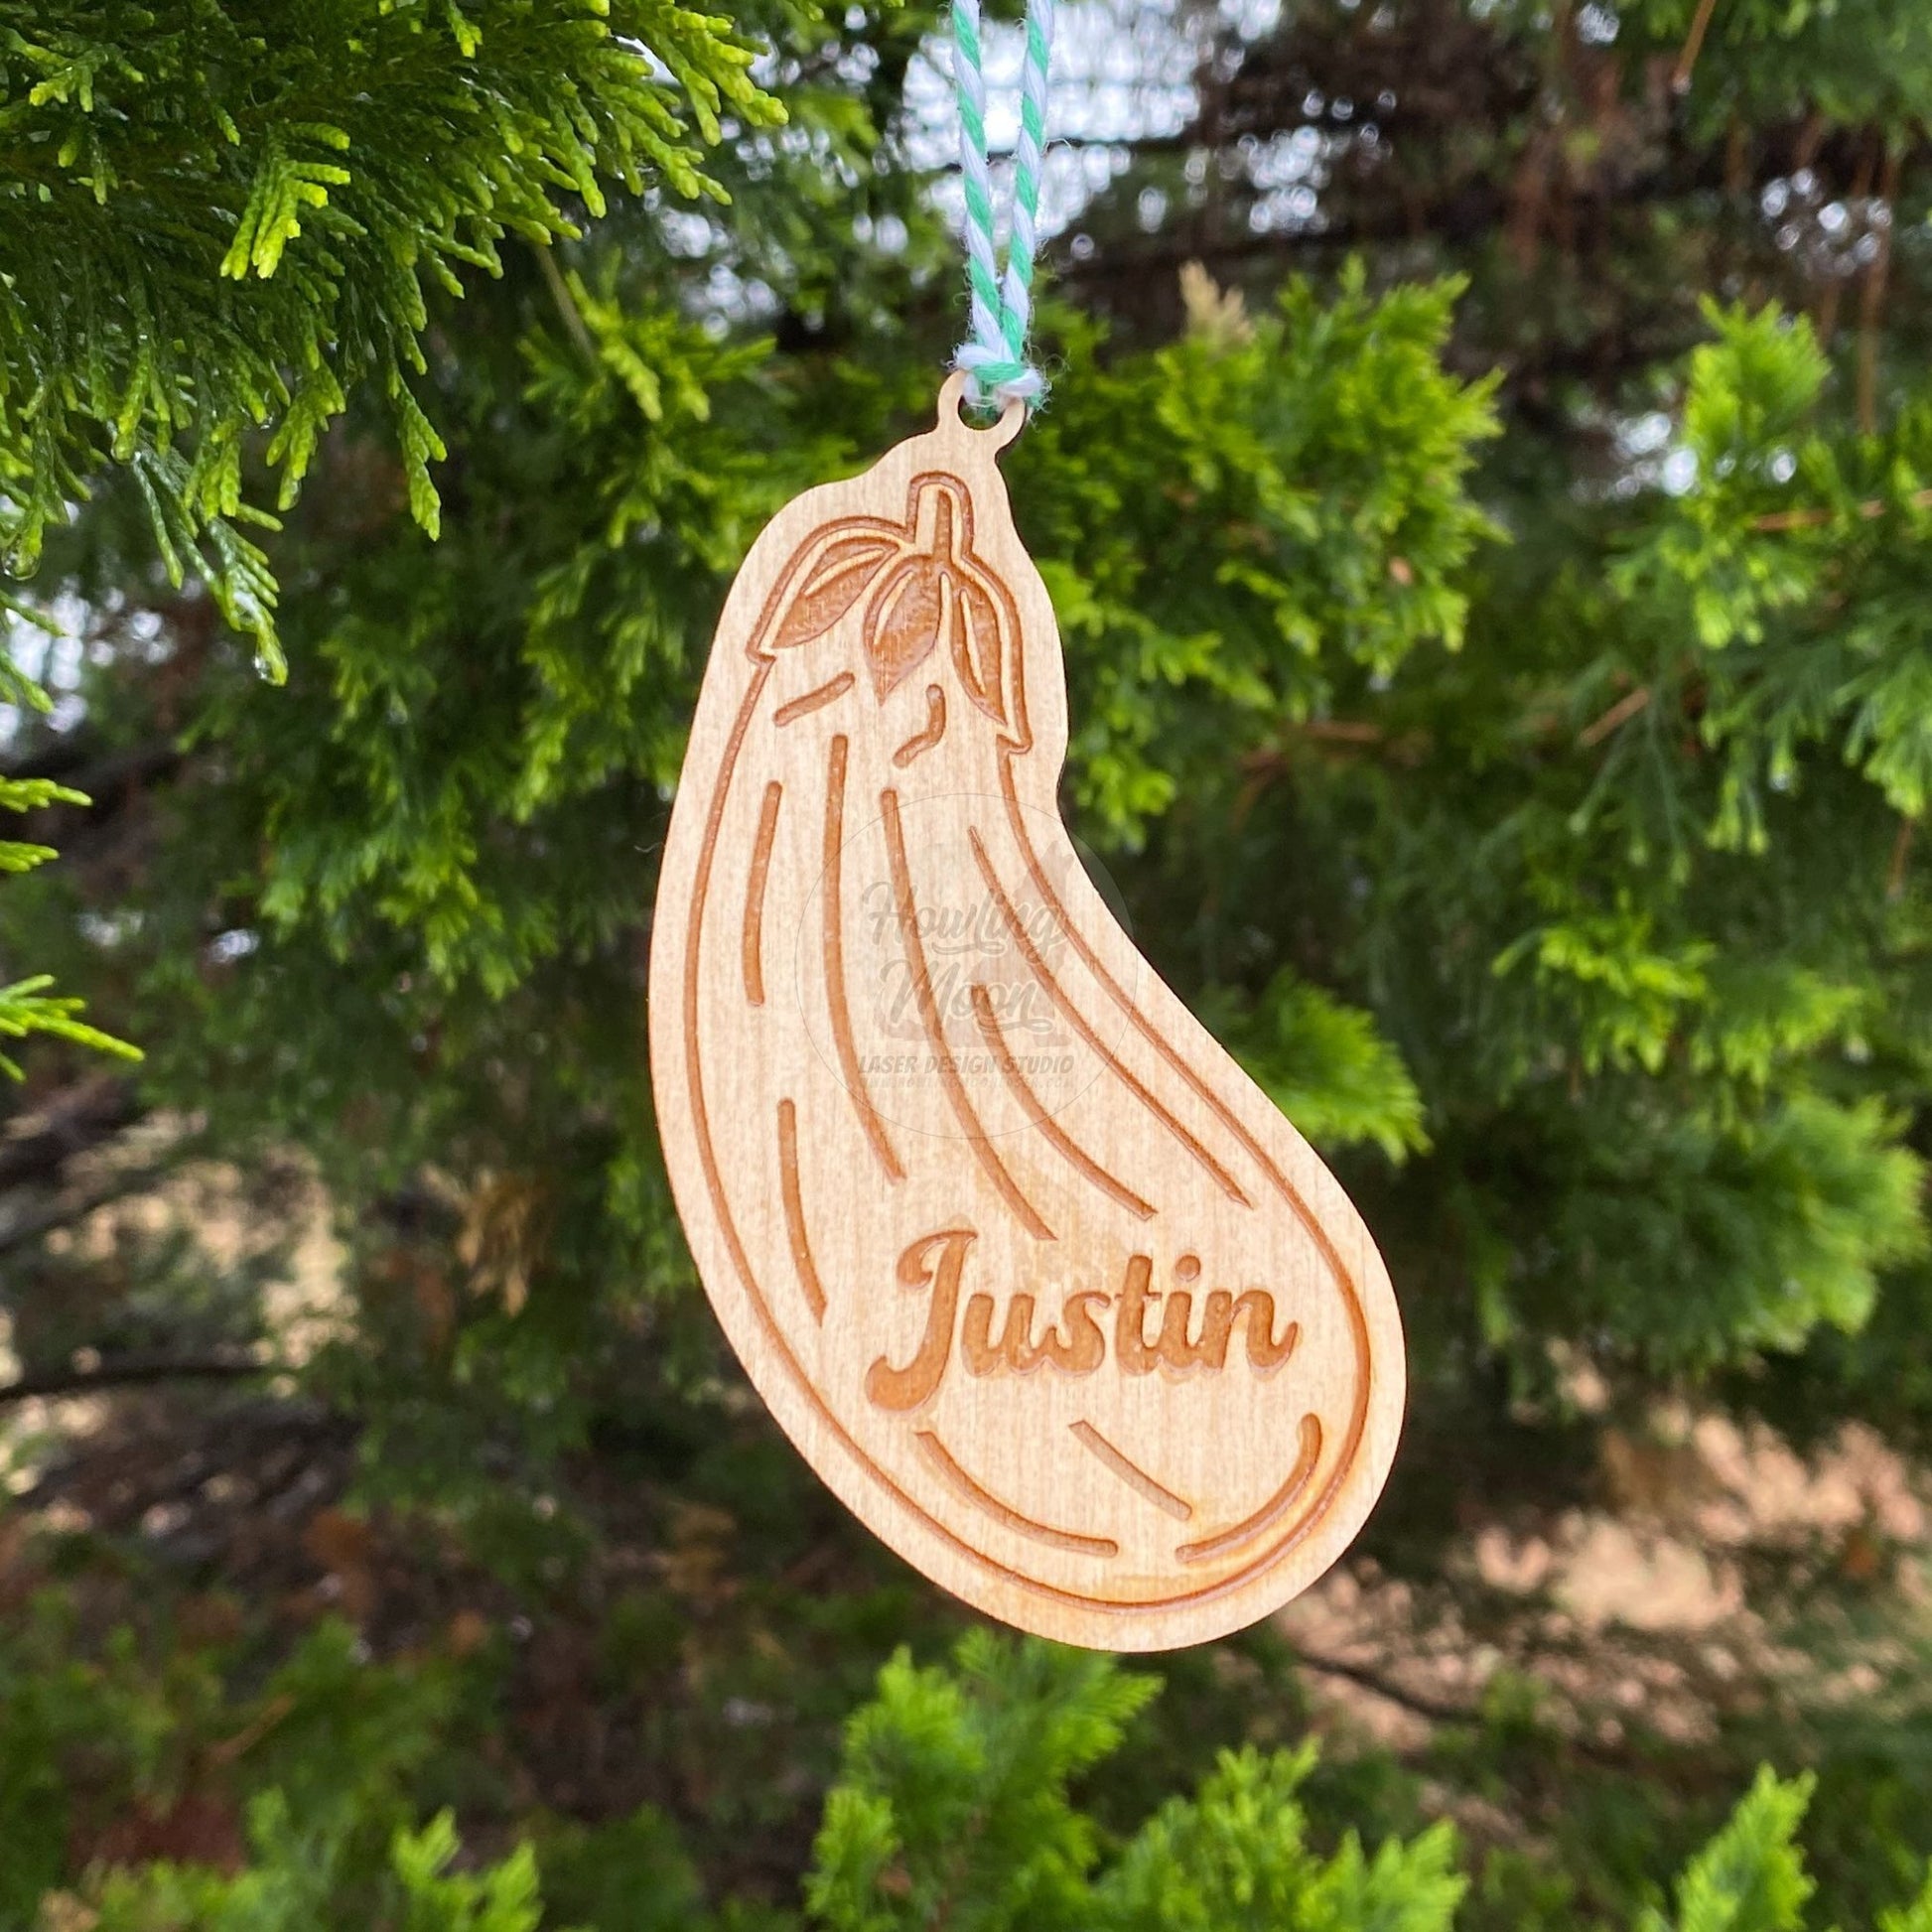 Personalized eggplant ornament from Howling Moon Laser Design Studio in Virginia USA